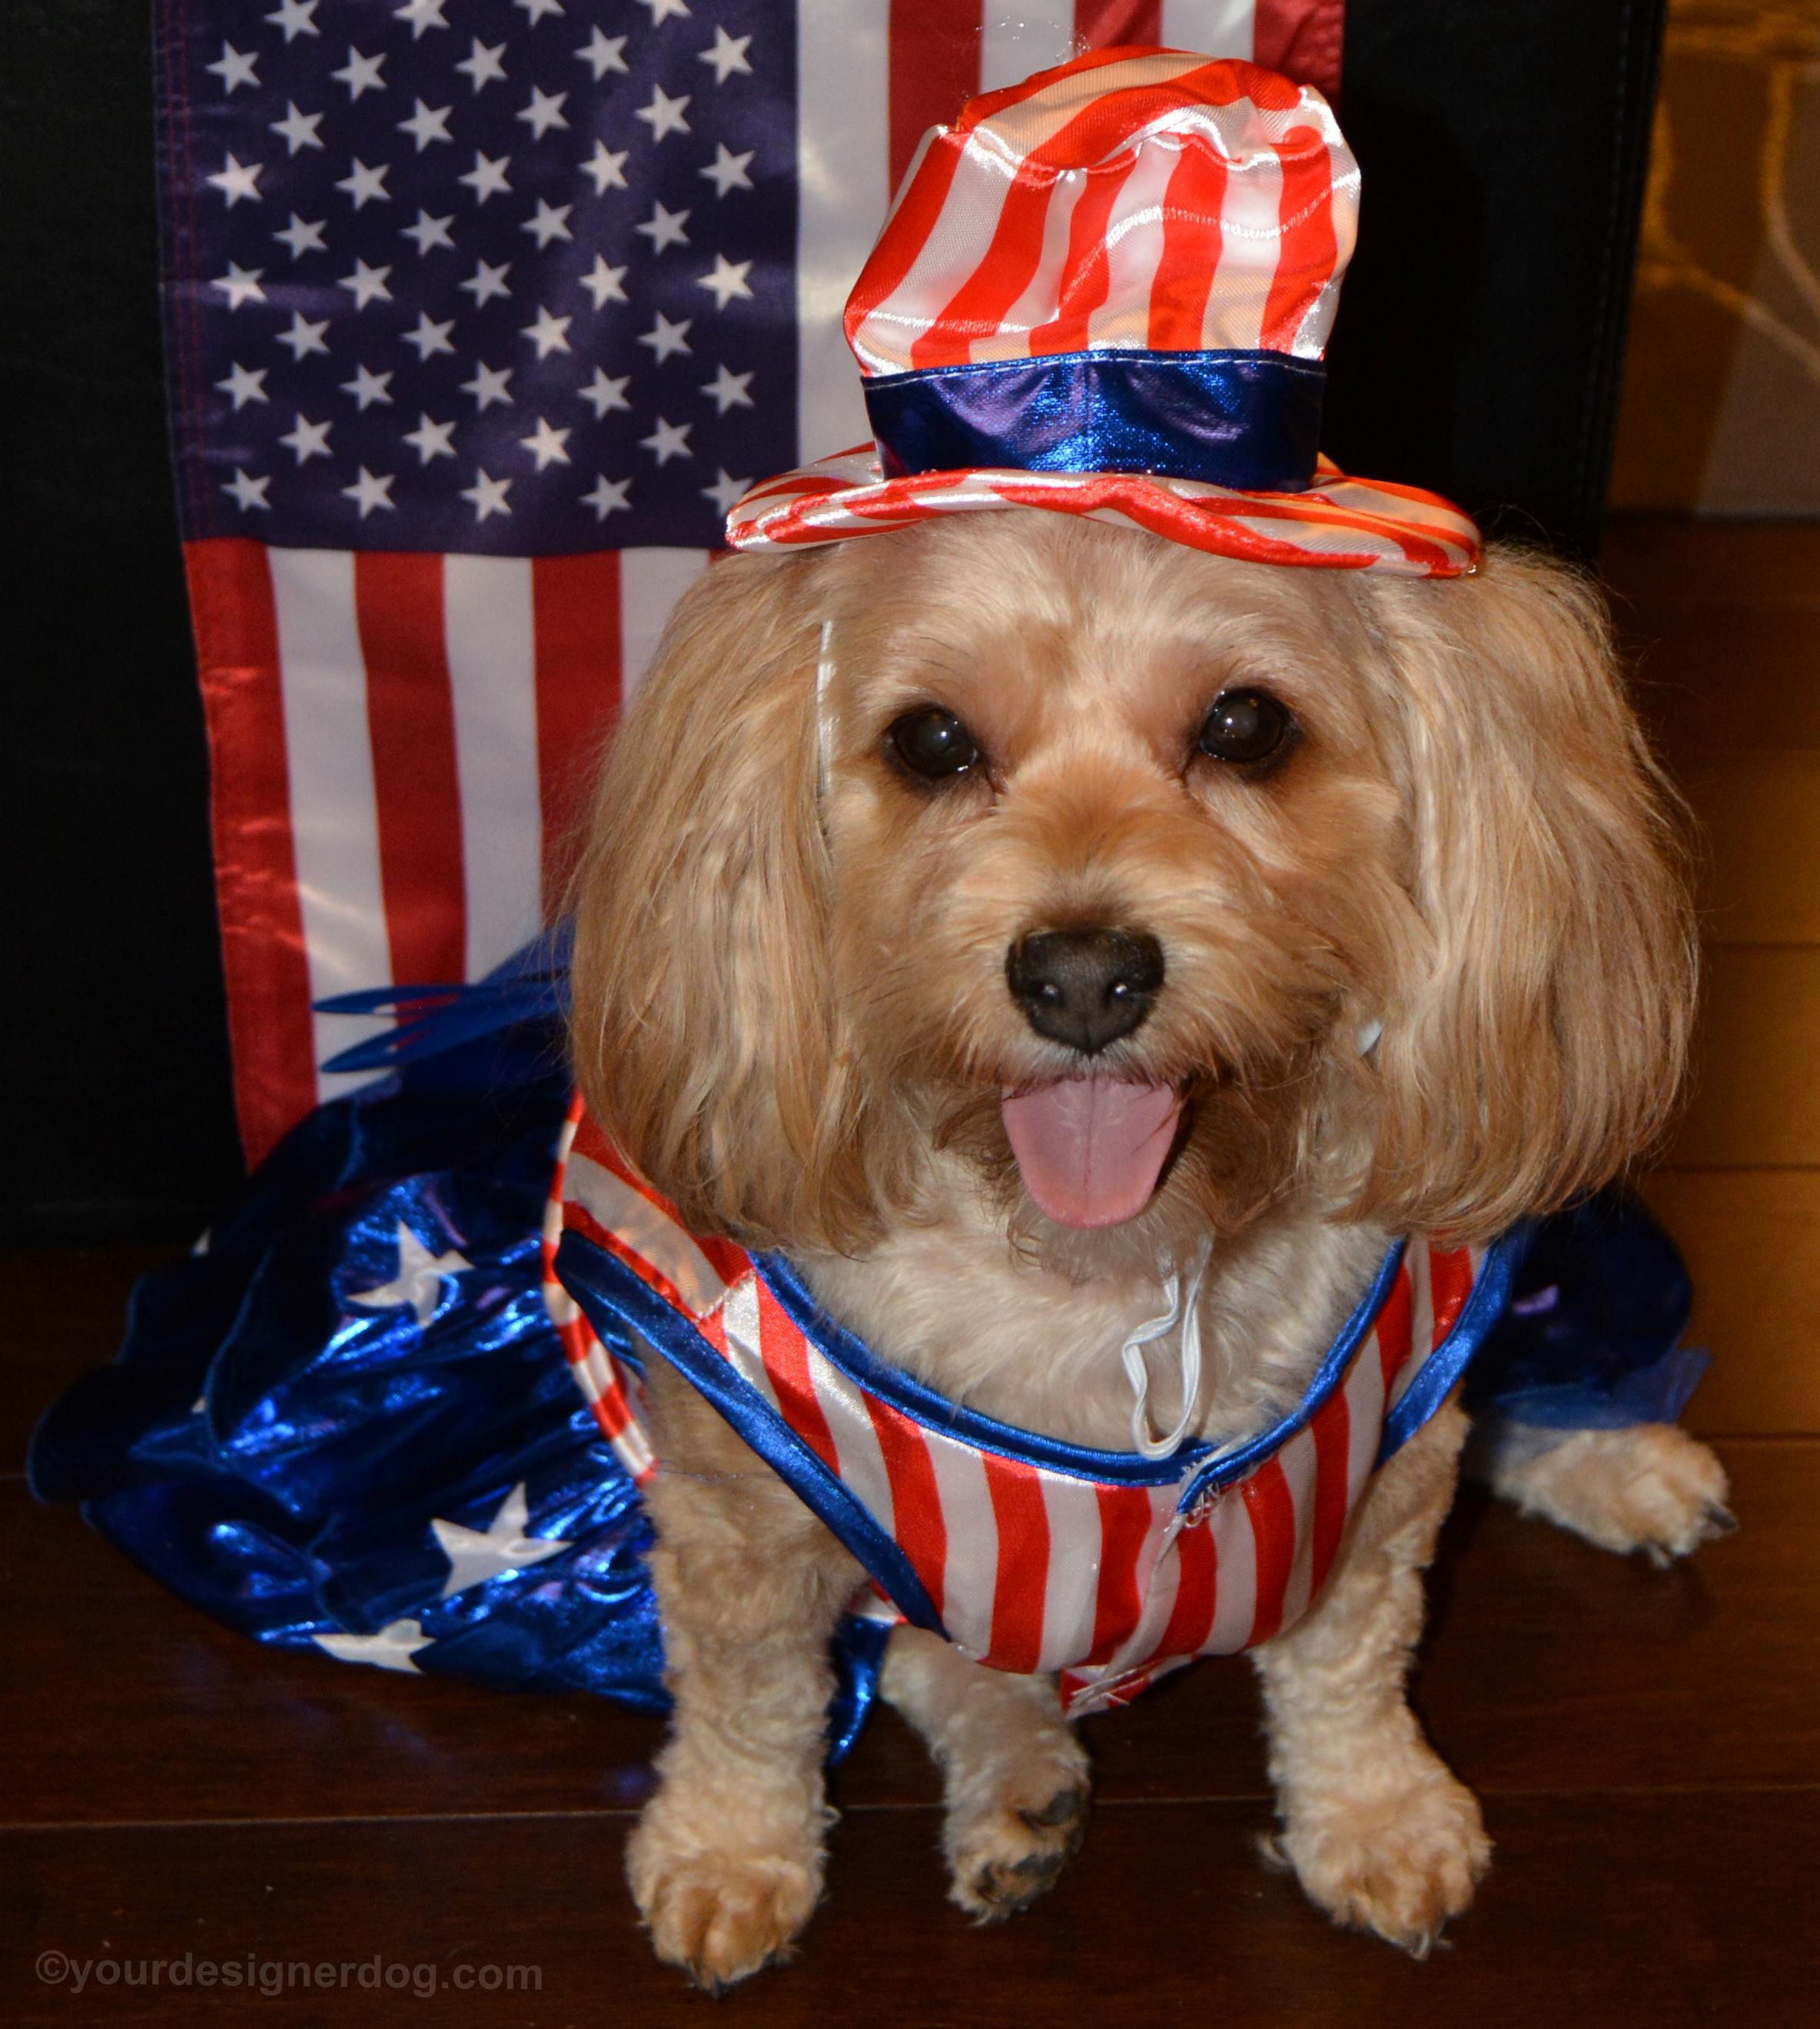 dogs, designer dogs, yorkipoo, yorkie poo, patriotic, tongue out, dog costume